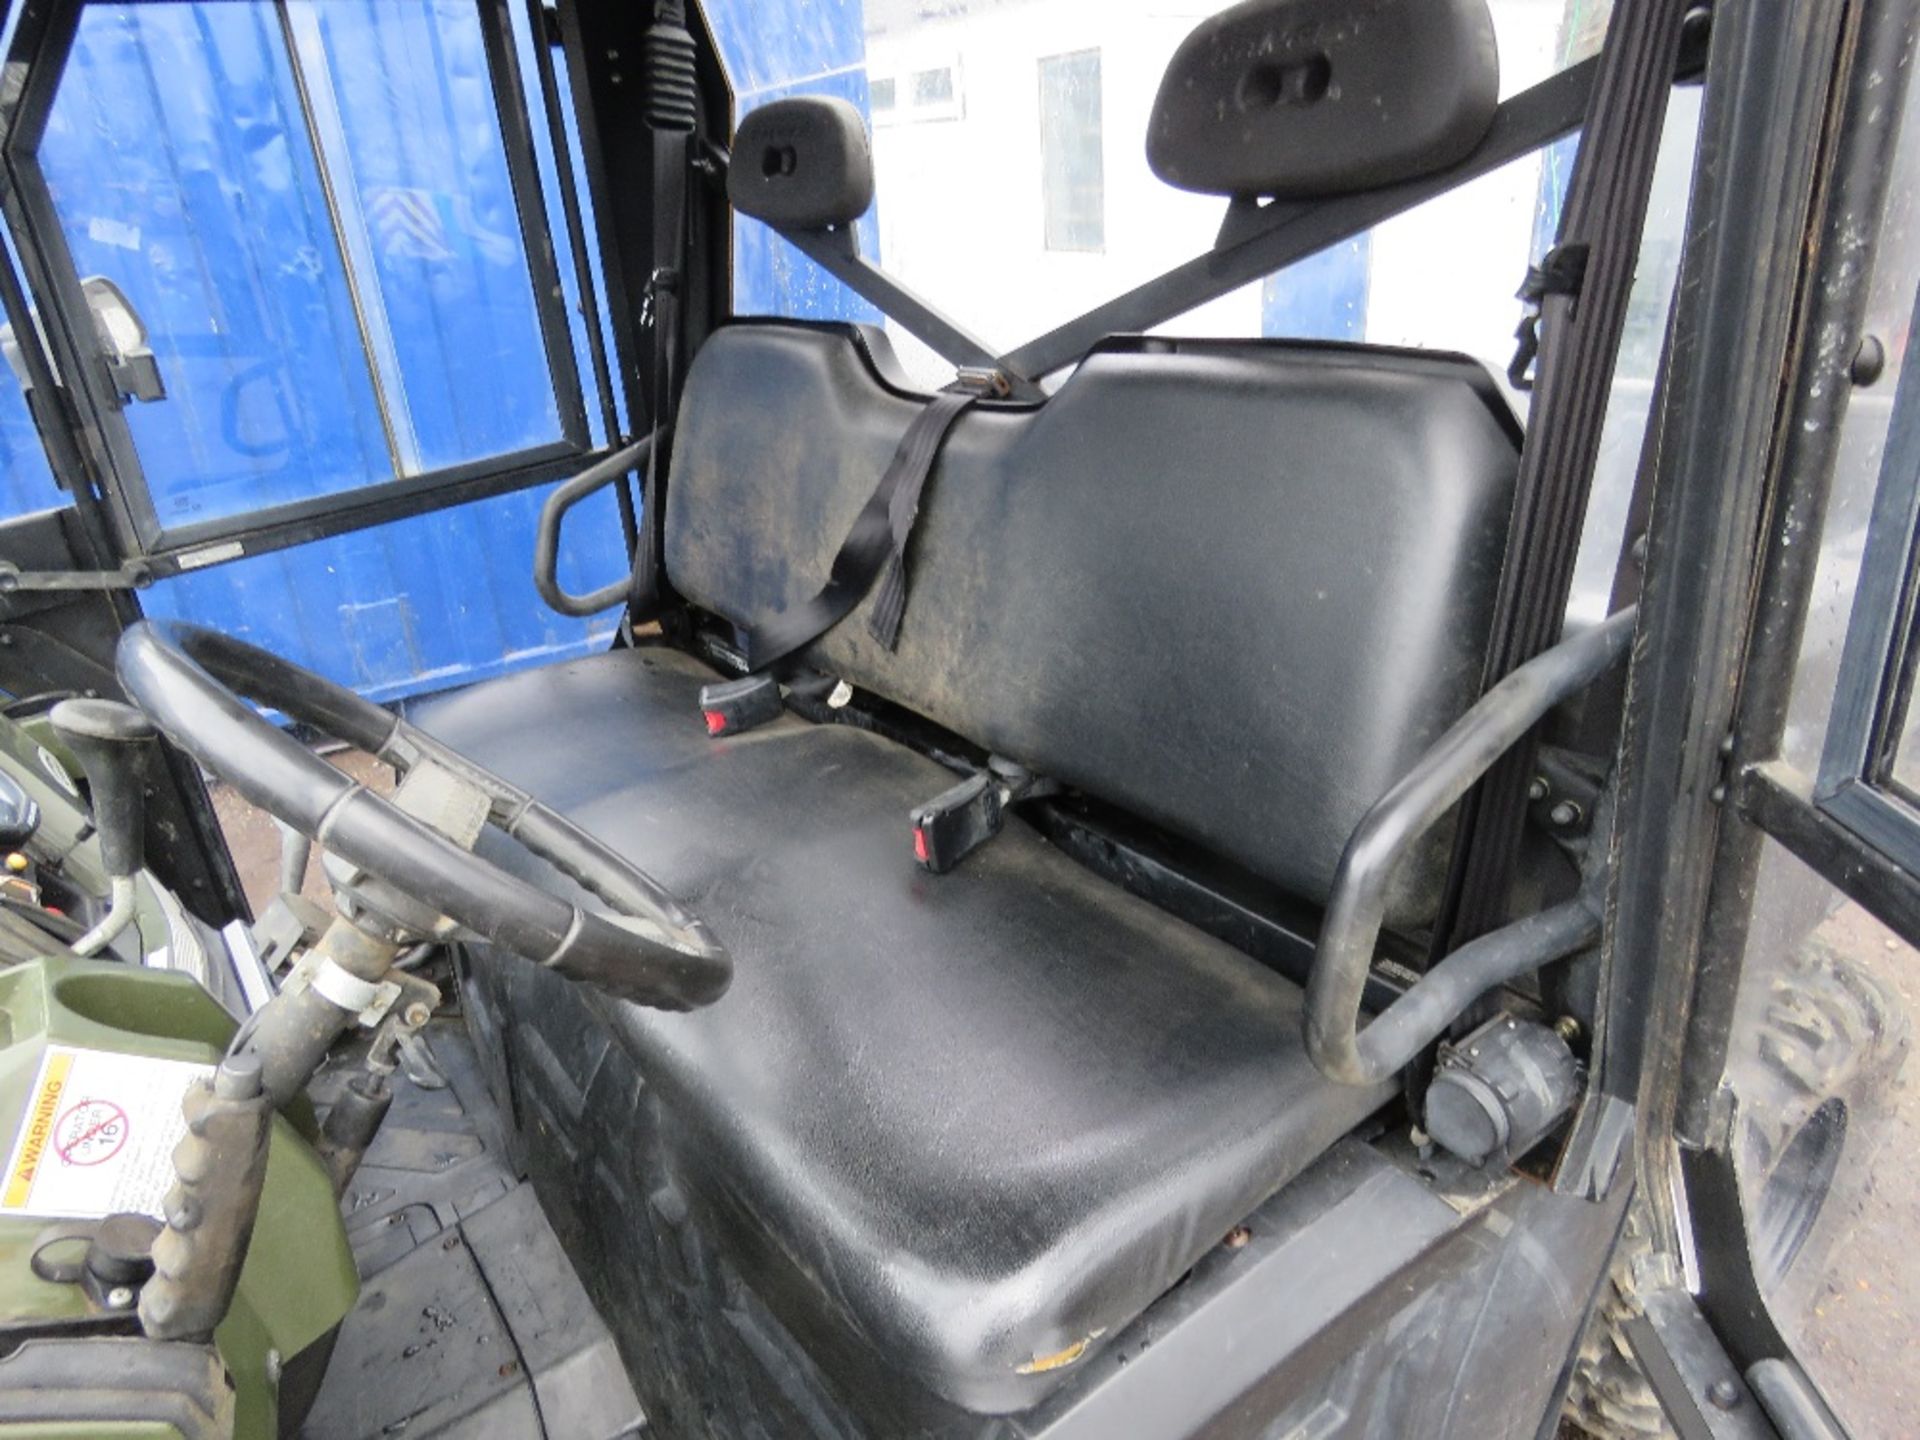 POLARIS 900D CABBED RANGER DIESEL ENGINED ROUGH TERRAIN OFF ROAD BUGGY UTILITY VEHICLE 1363 REC HOUR - Image 5 of 9